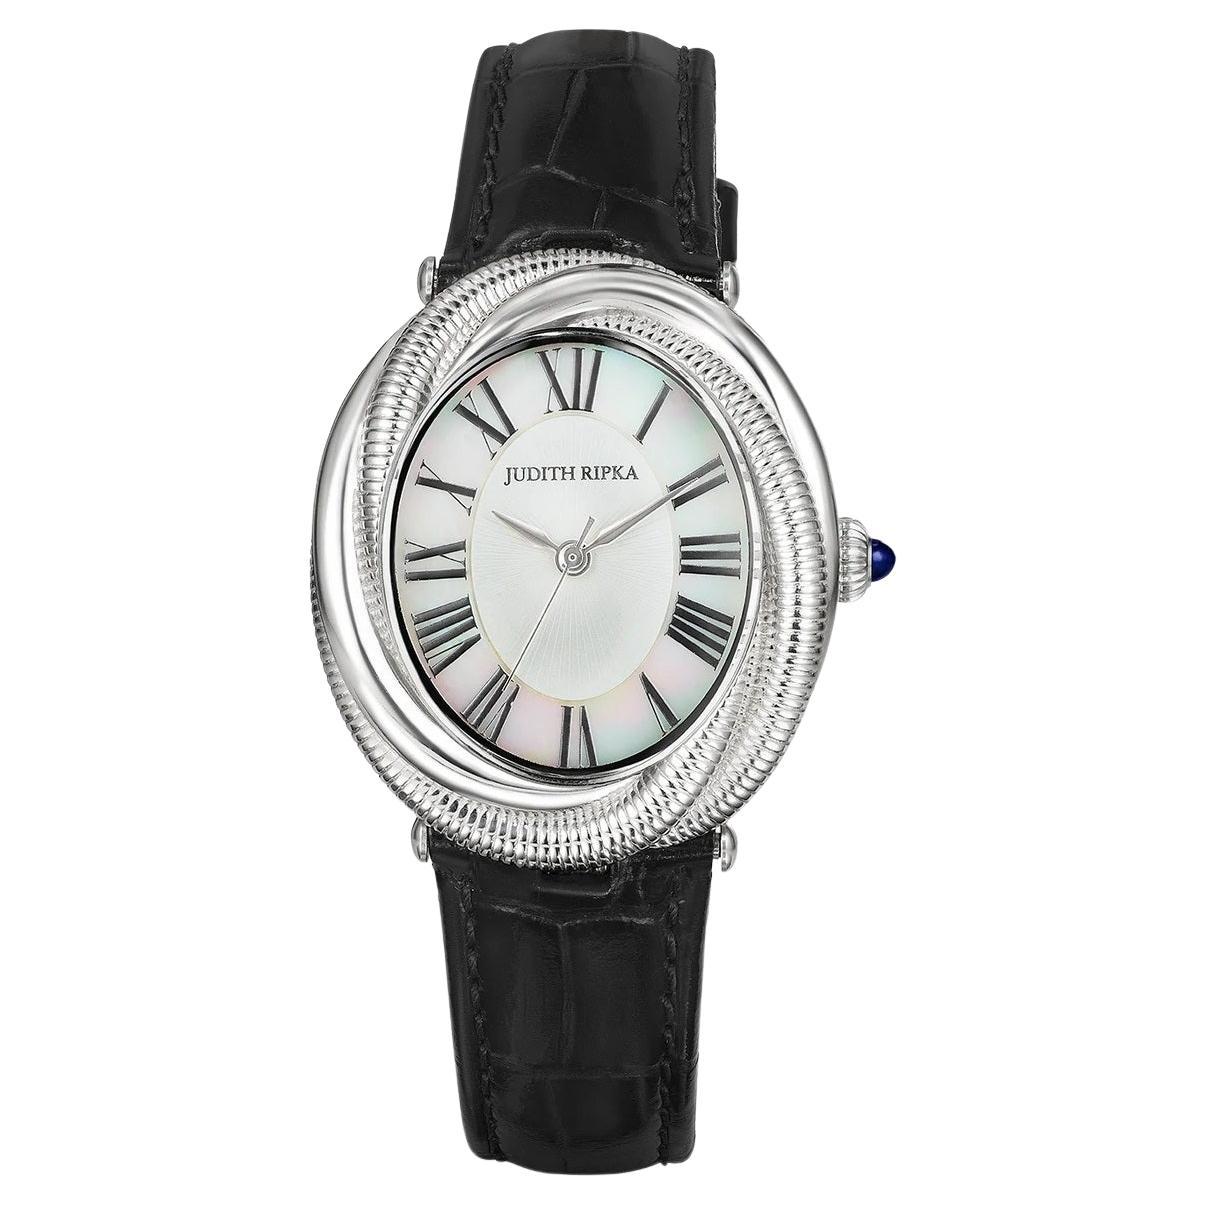 JUDITH RIPKA - Eternity Watch with Mother of Pearl, Sapphire & GENUINE CROCODILE For Sale